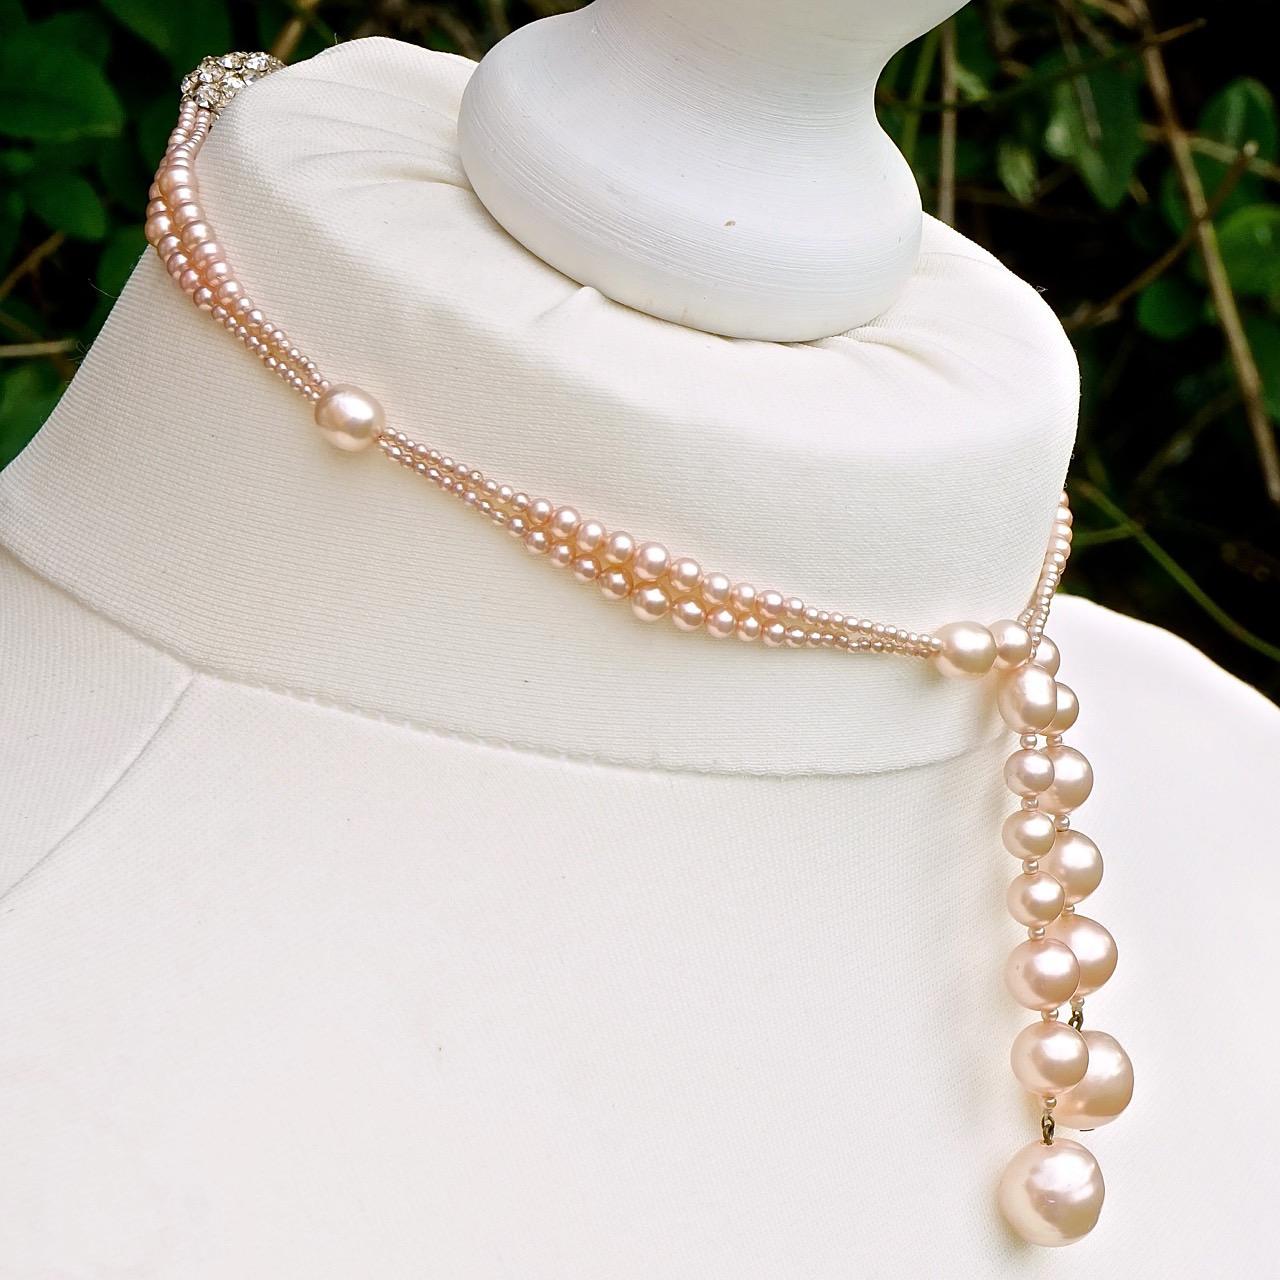 Art Deco Small Pale Pink Faux Pearl and Rhinestone Sautoir Necklace For Sale 2